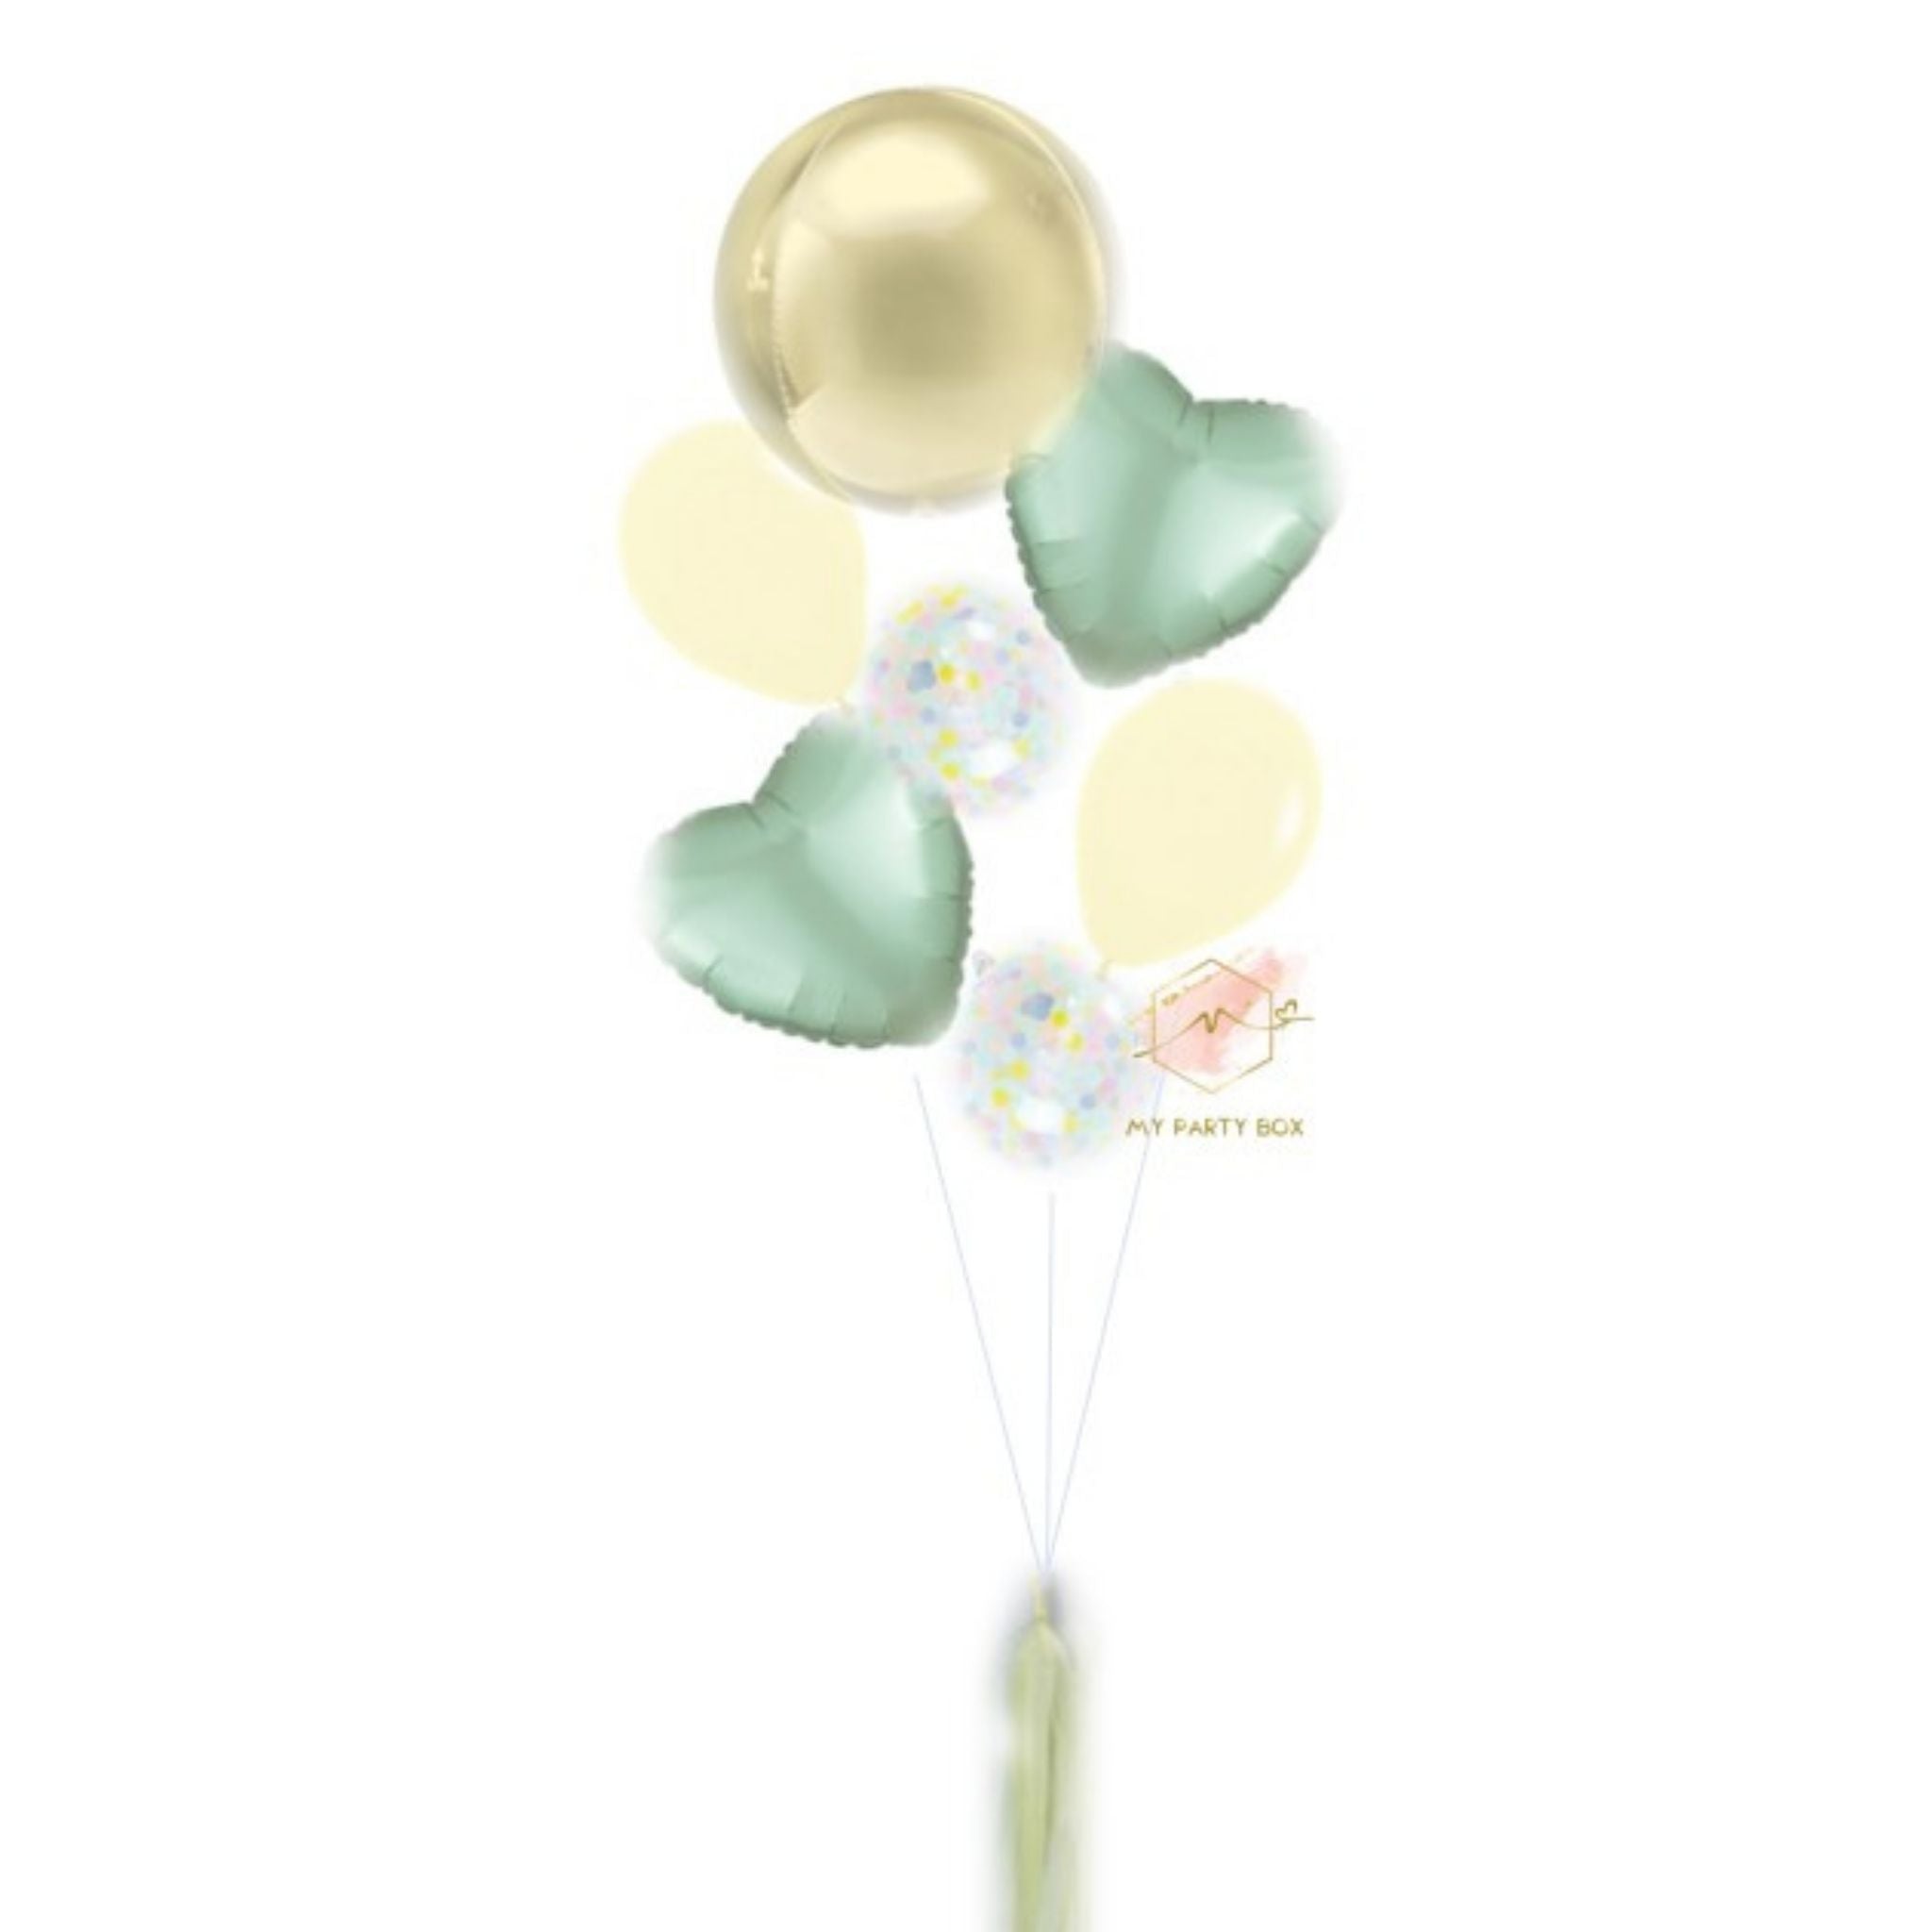 My Party Box Pastel Yellow Deluxe Balloon Bouquet